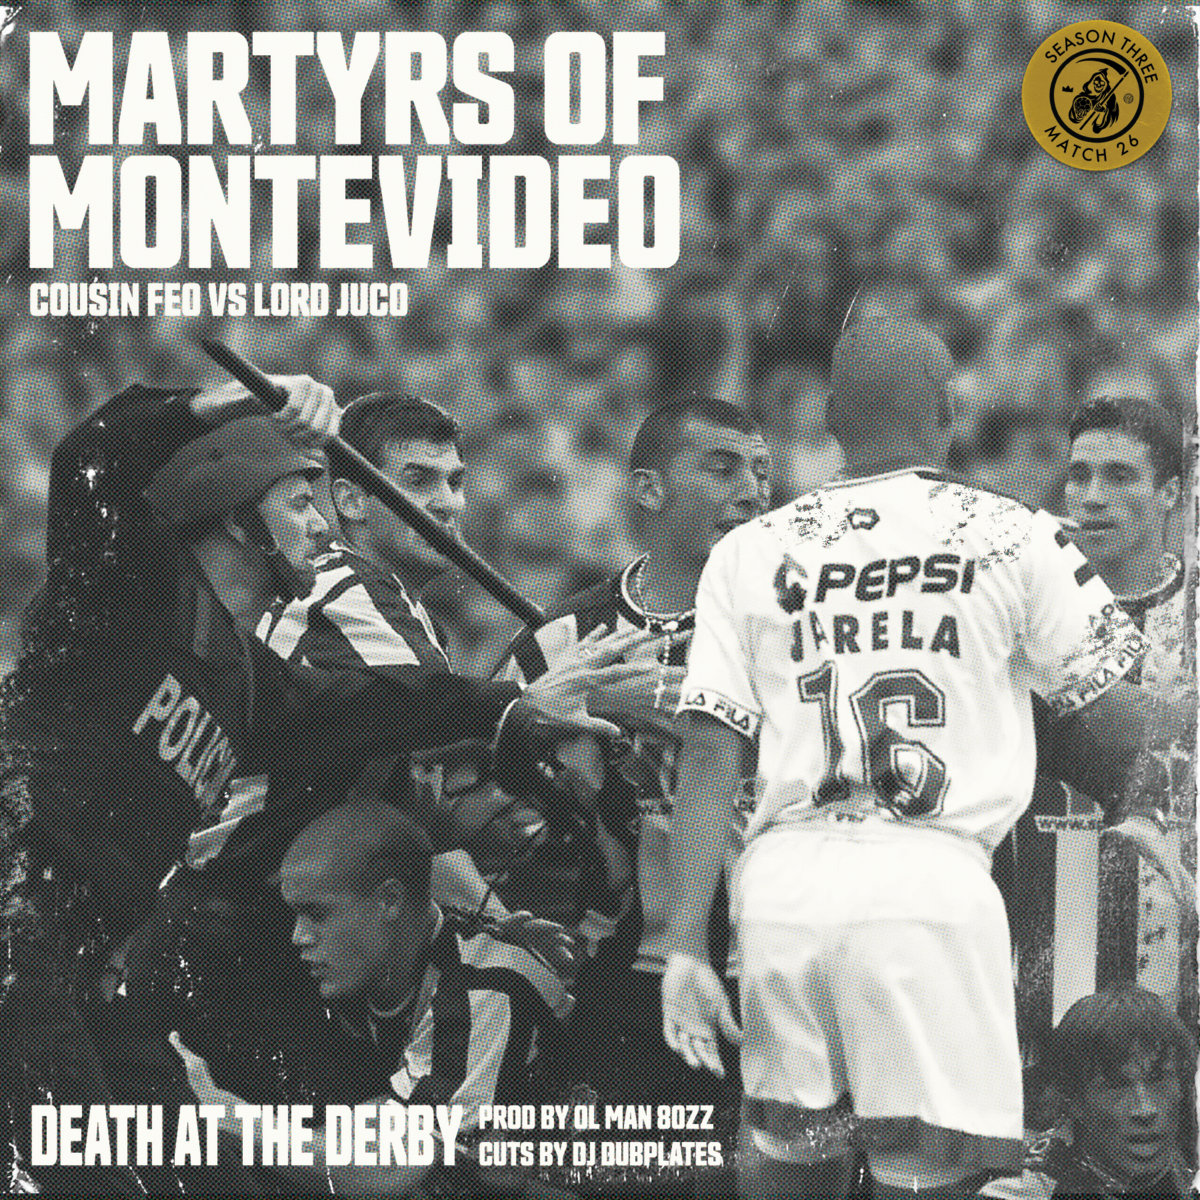 Martyrs_of_montevideo_death_at_the_derby